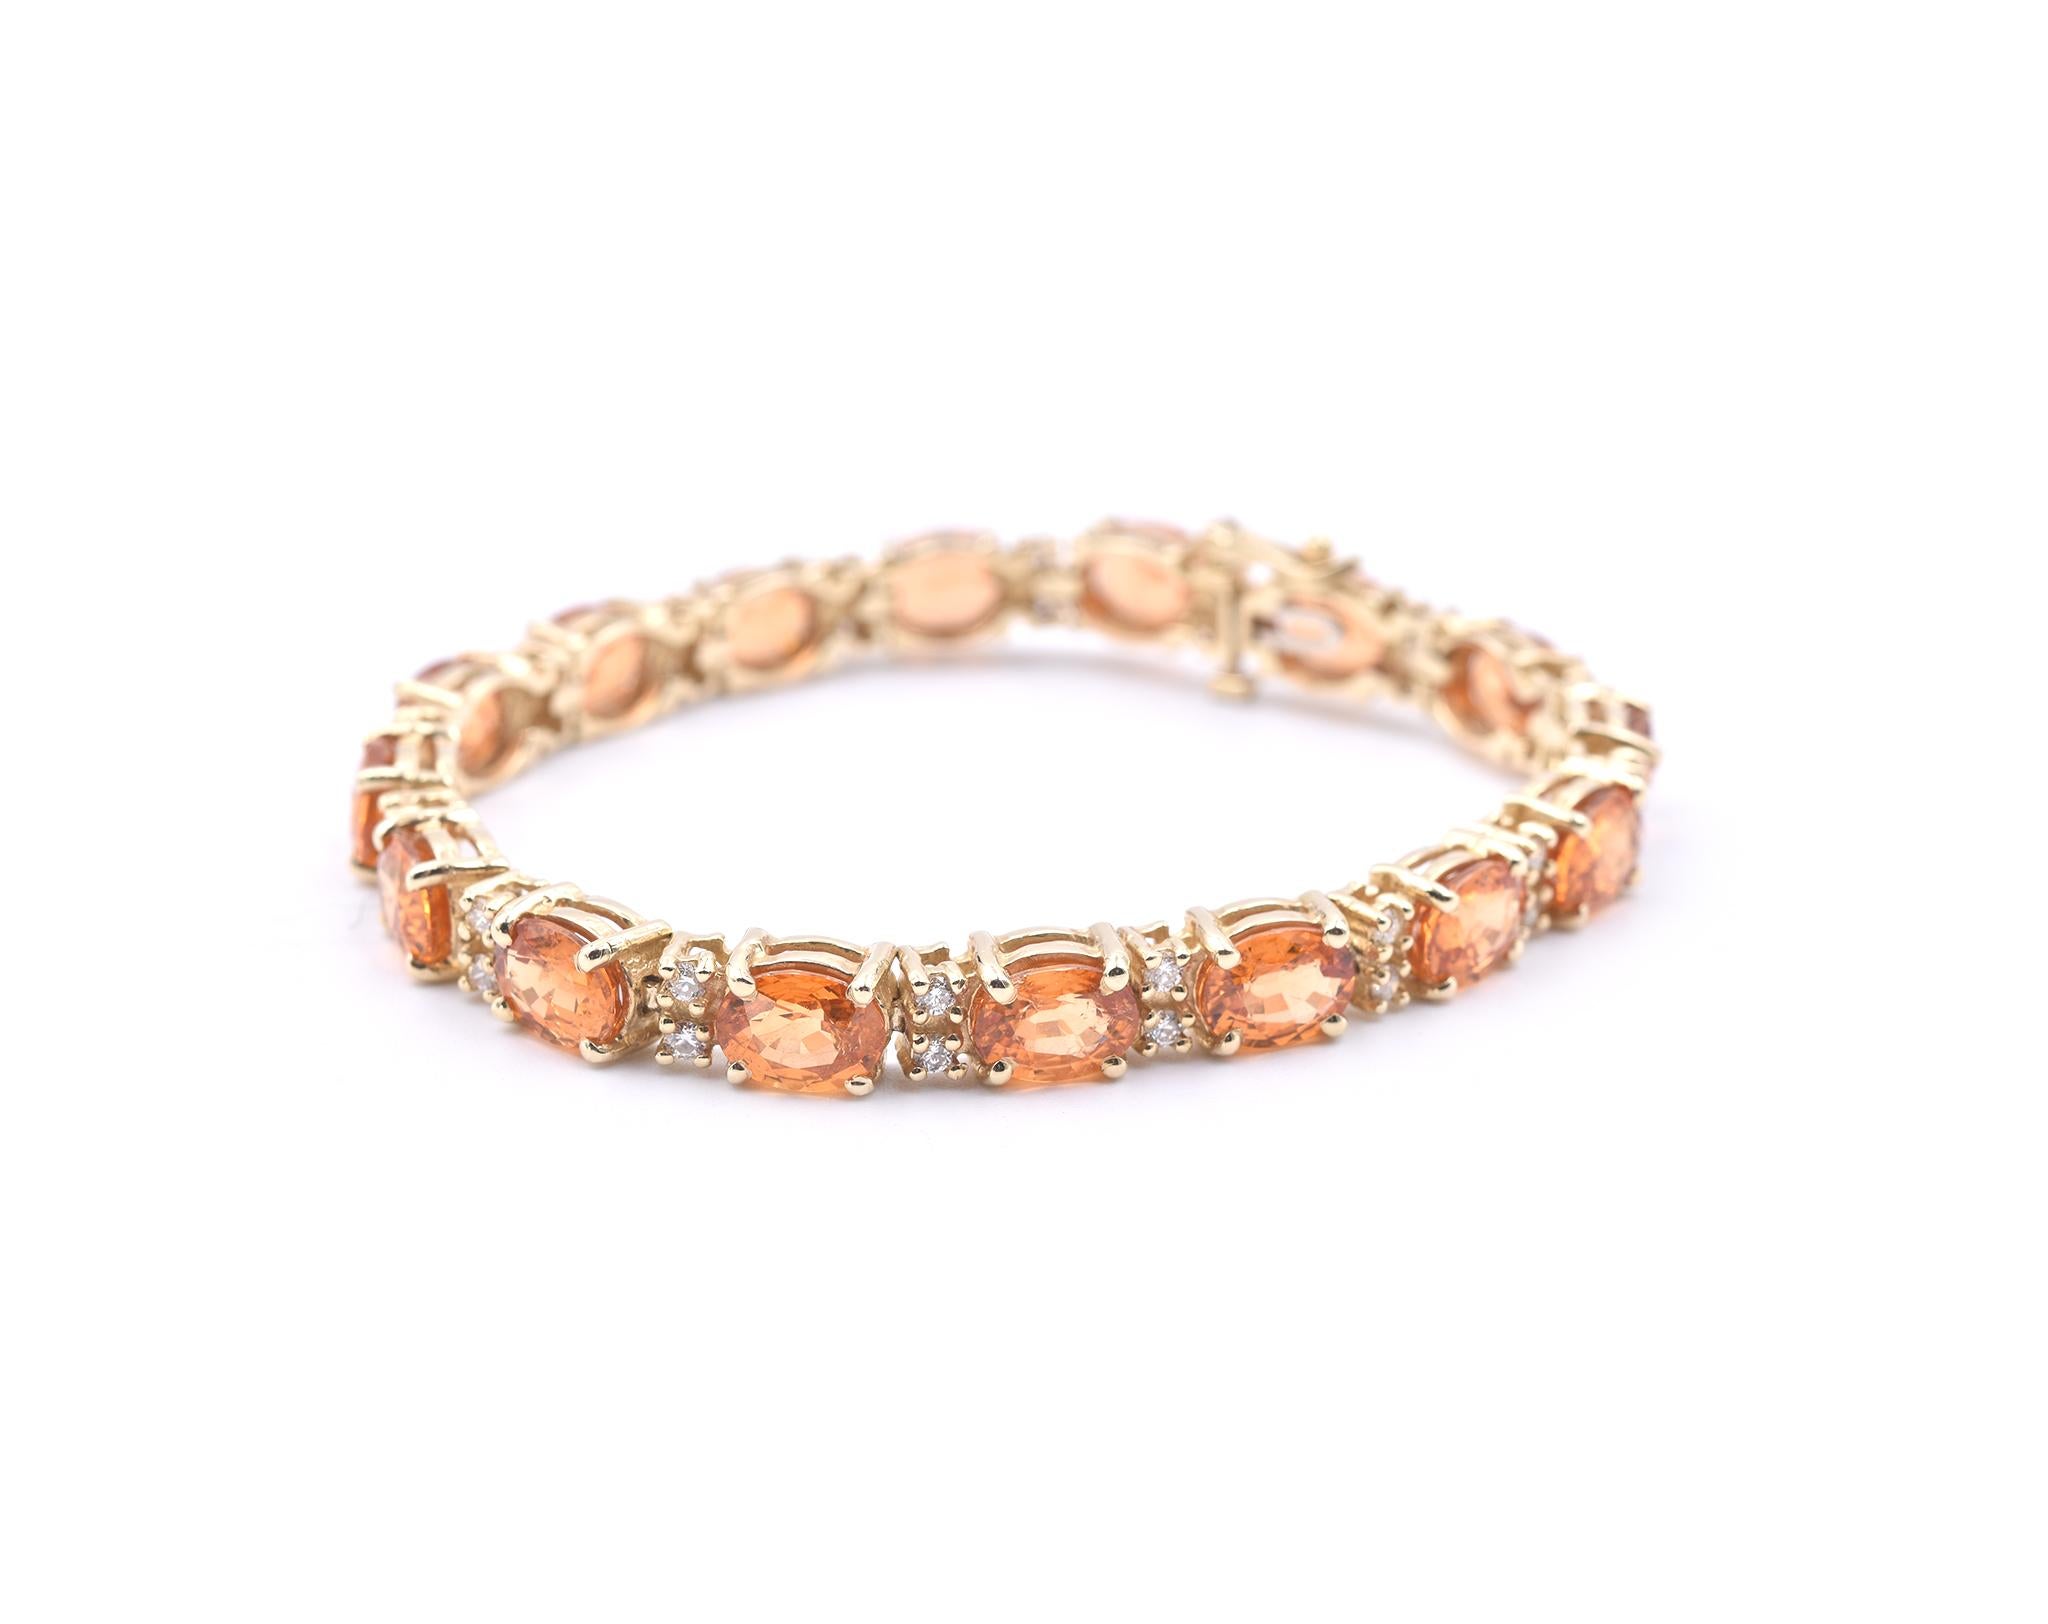 Designer: Custom
Material: 14k yellow gold
Garnets: 16 oval garnets = 27.75ct 
Diamonds: 32 round brilliant cuts = .91cttw
Dimensions: bracelet is 7-inches in length and 6.25mm in width
Weight: 22.74 grams
